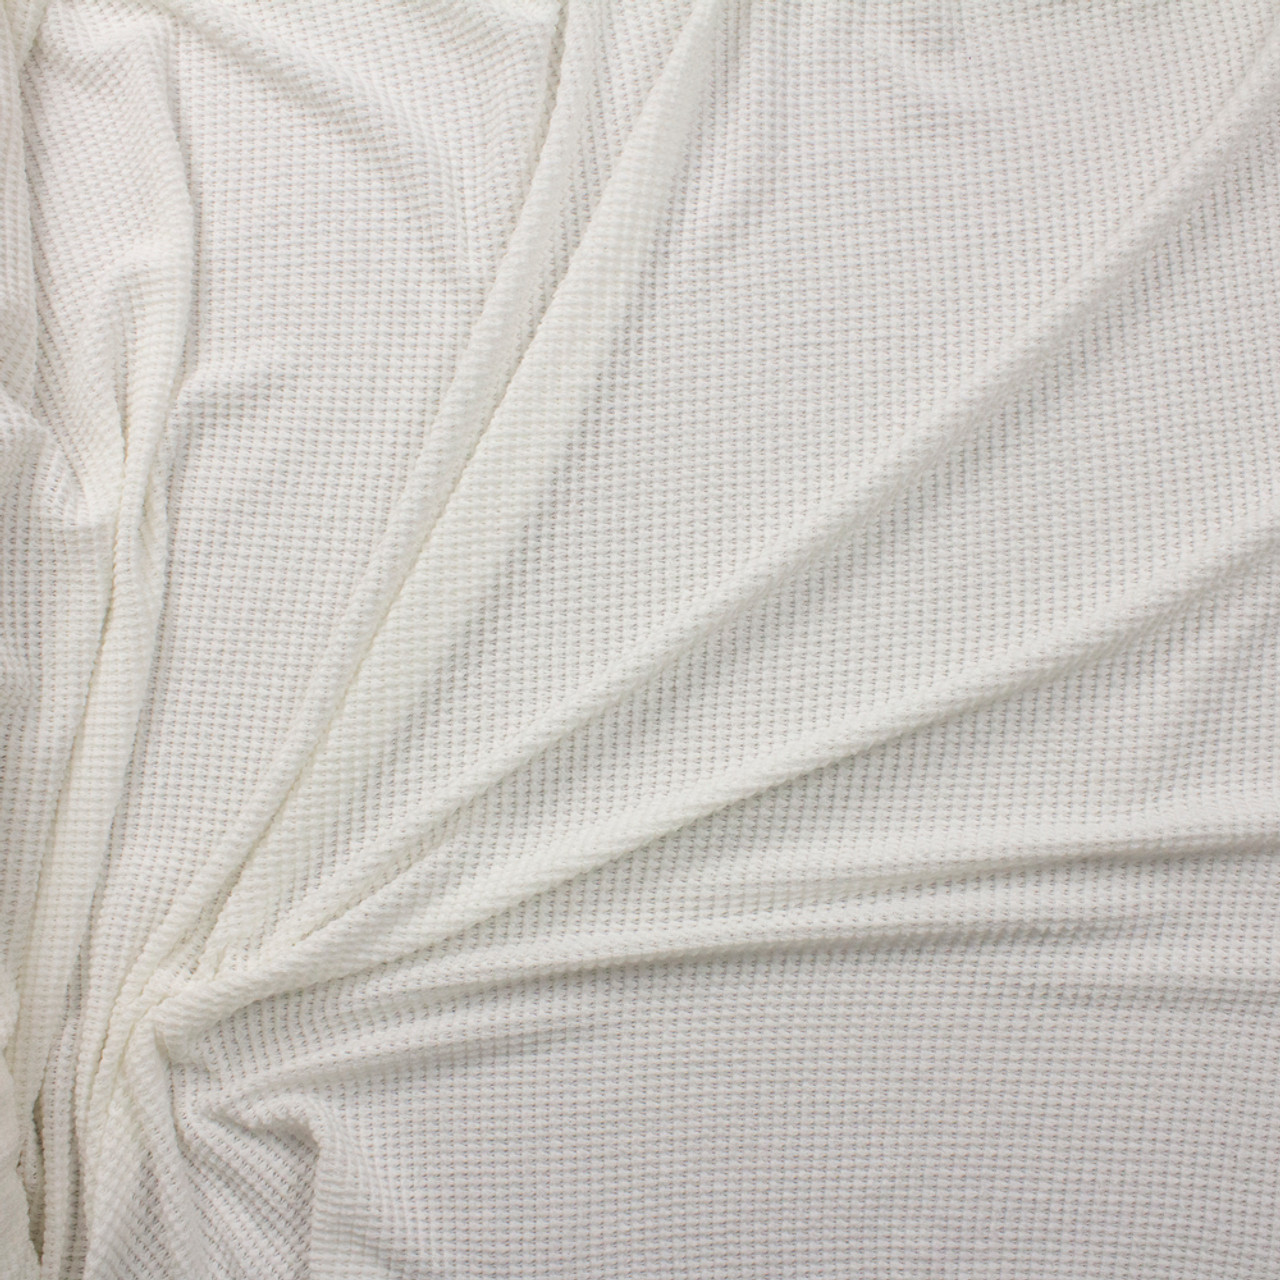 Cali Fabrics White Loose Weave Stretch Sweater Knit Fabric by the Yard